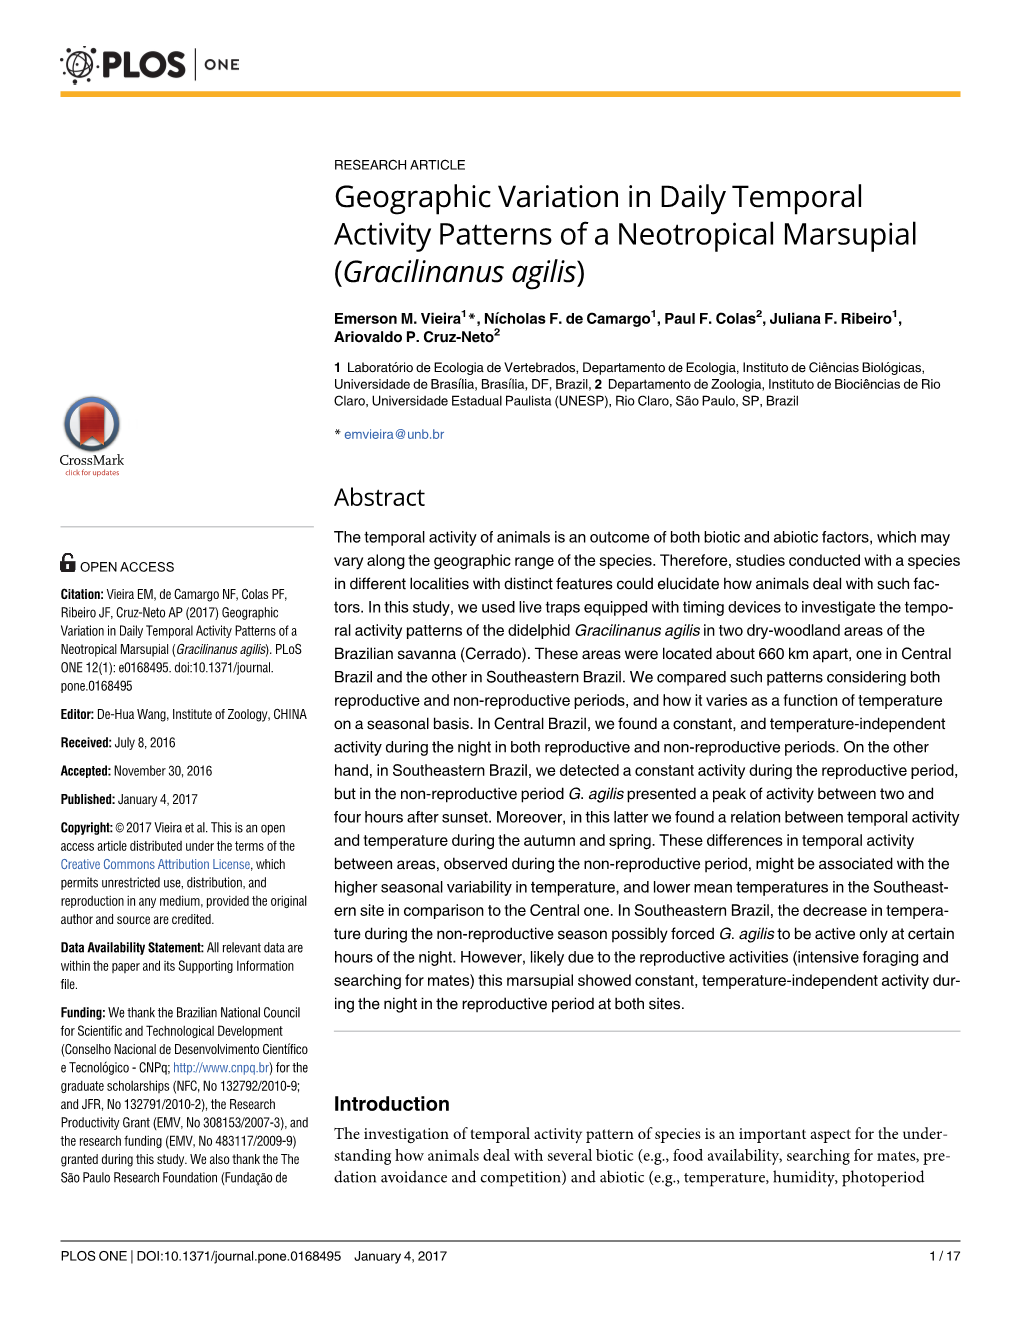 Geographic Variation in Daily Temporal Activity Patterns of a Neotropical Marsupial (Gracilinanus Agilis)